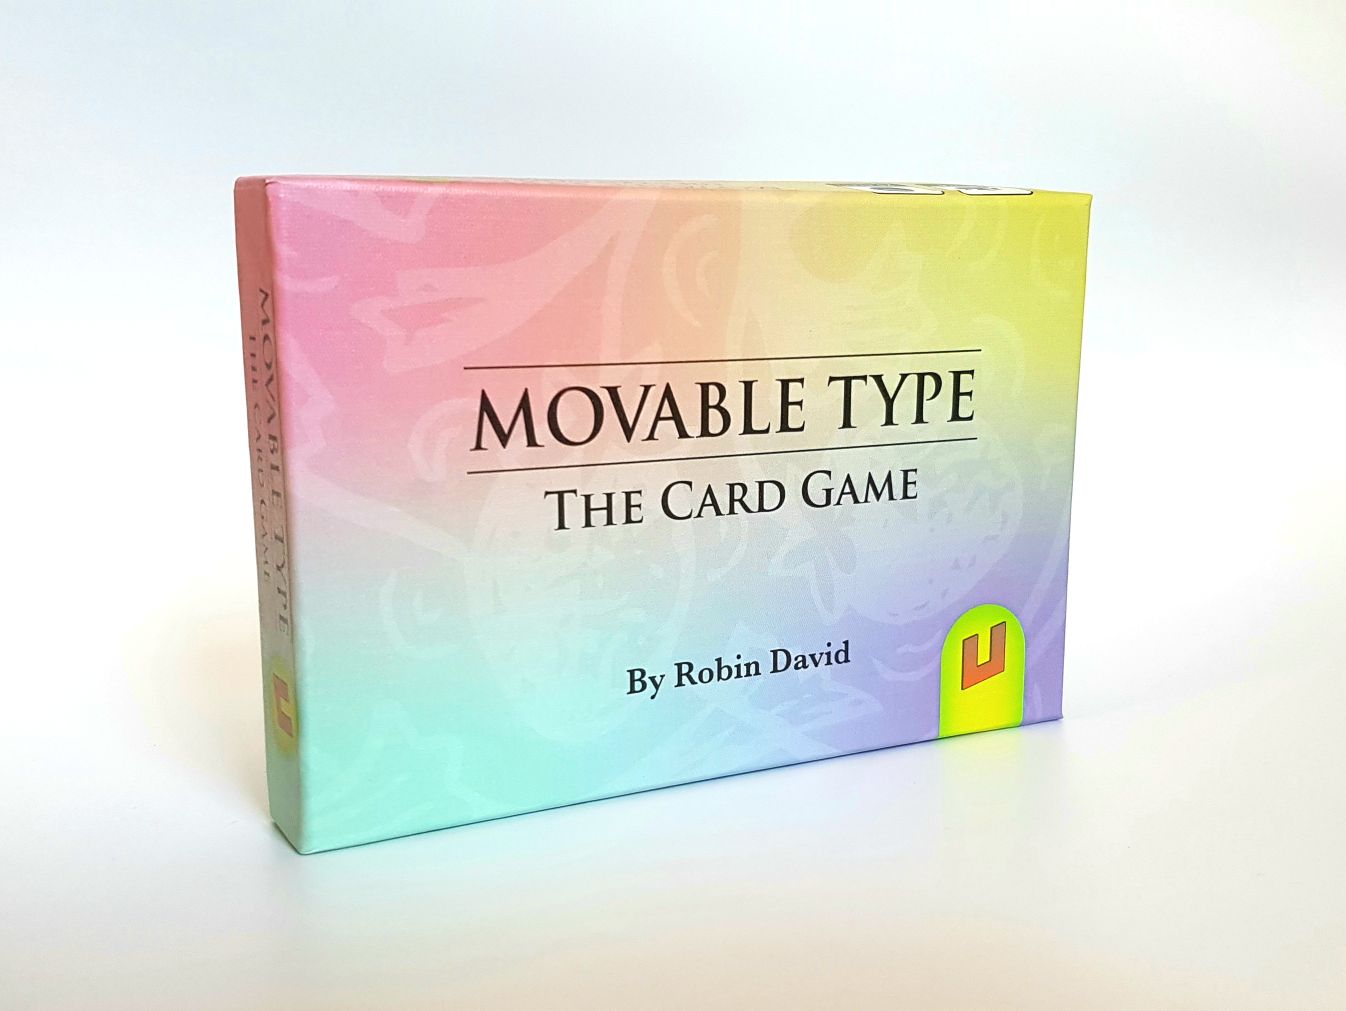 Movable Type second edition box.